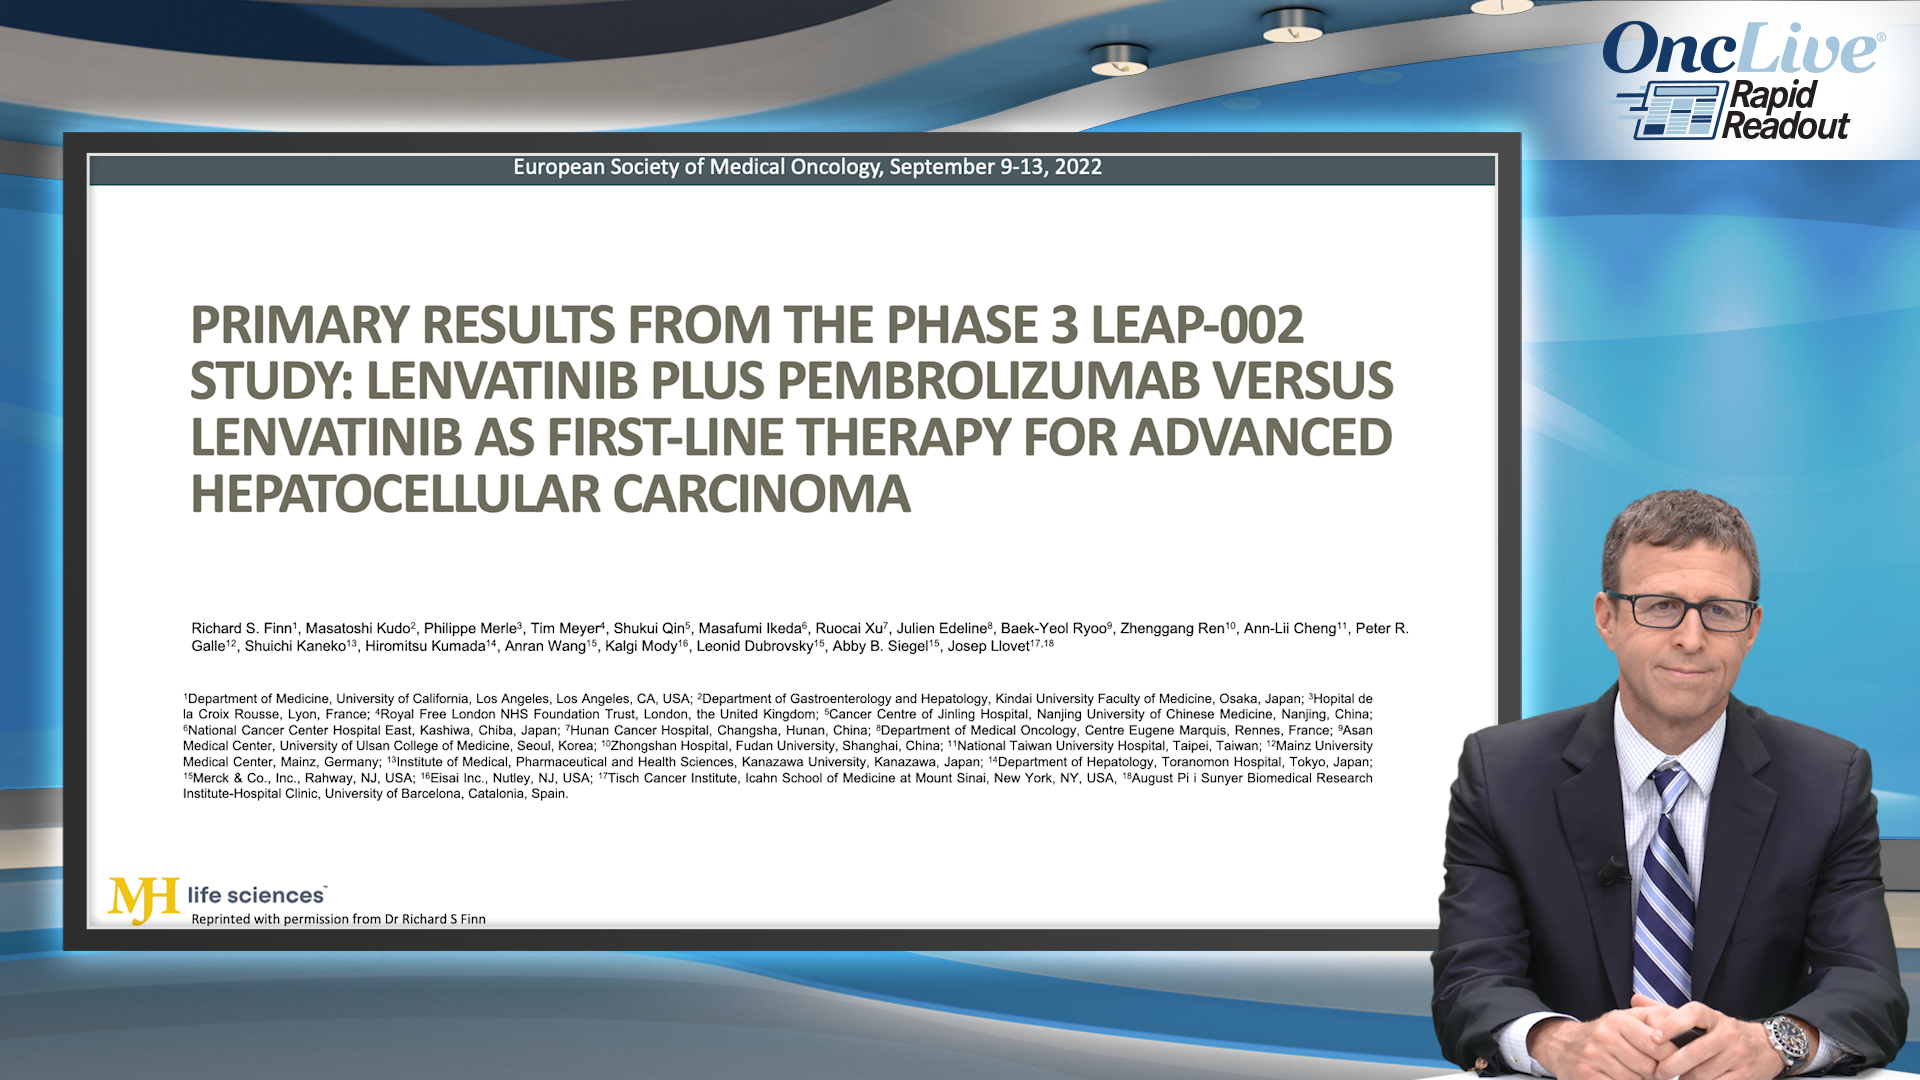 Primary Results from the Phase 3 Leap-002 Study: Lenvatinib plus Pembrolizumab versus Lenvatinib as First-Line Therapy for Advanced Hepatocellular Carcinoma